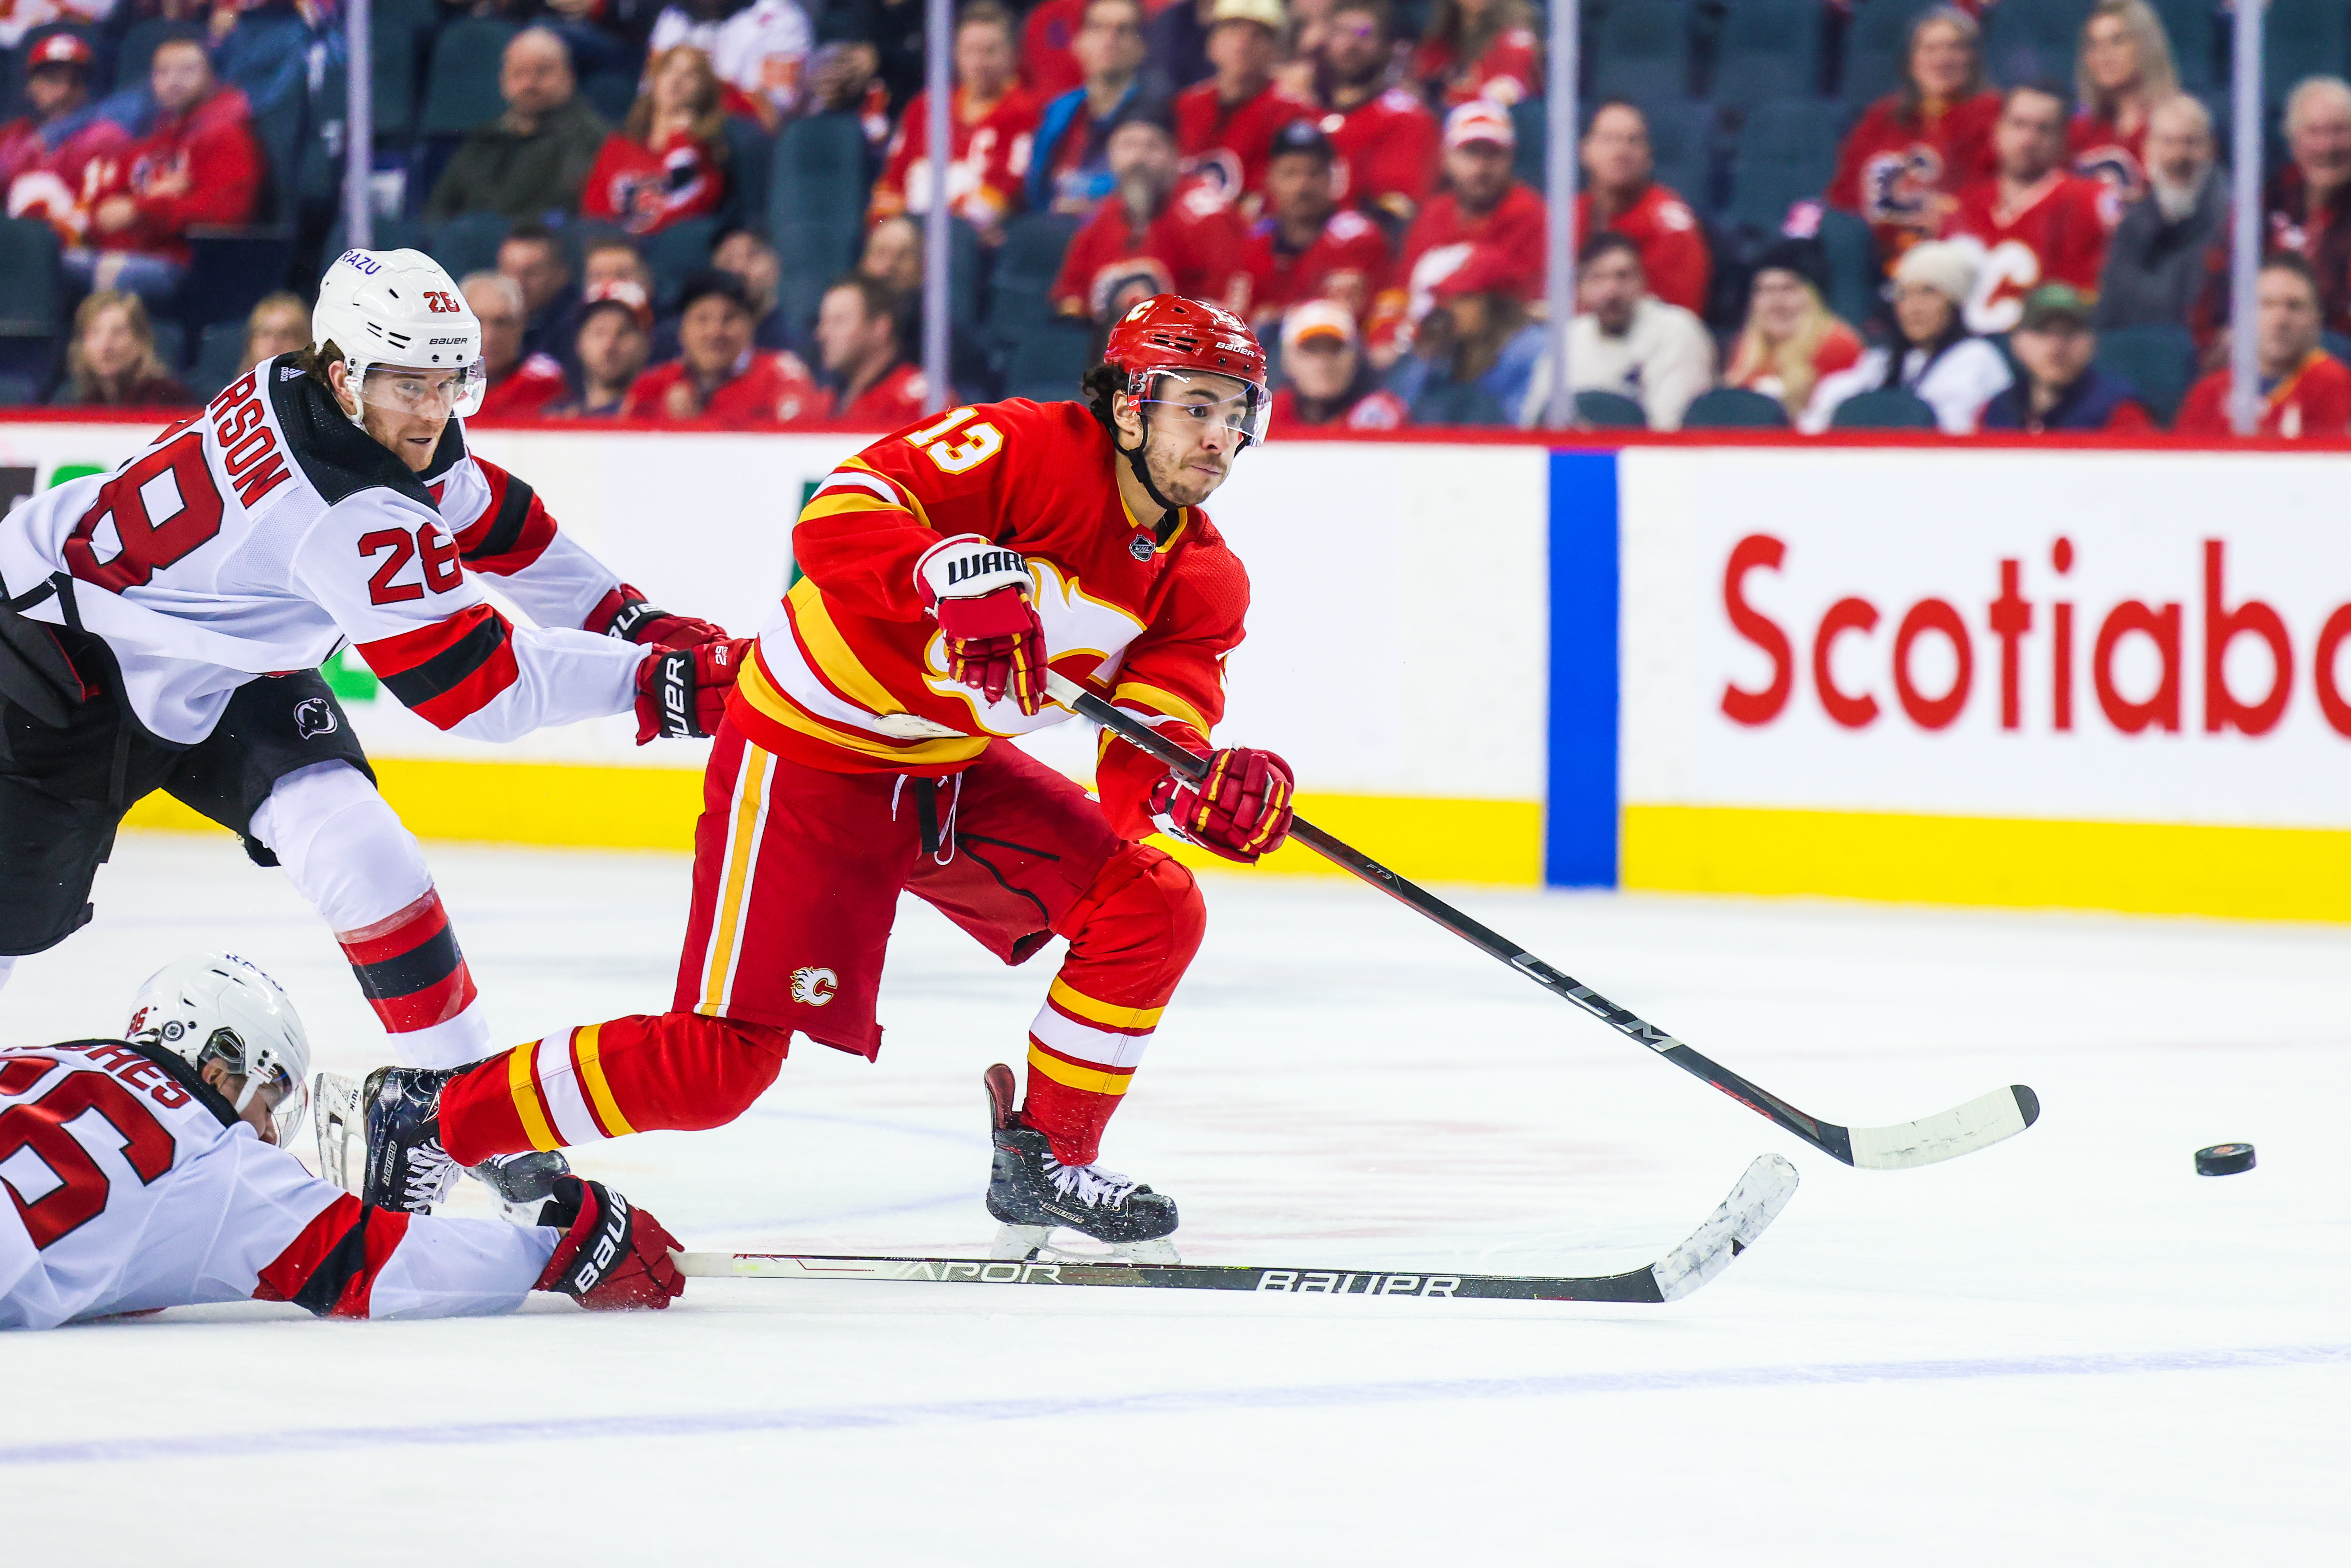 Mar 16, 2022; Calgary, Alberta, CAN; Calgary Flames left wing Johnny Gaudreau (13) scores a goal against the New Jersey Devils during the third period at Scotiabank Saddledome.